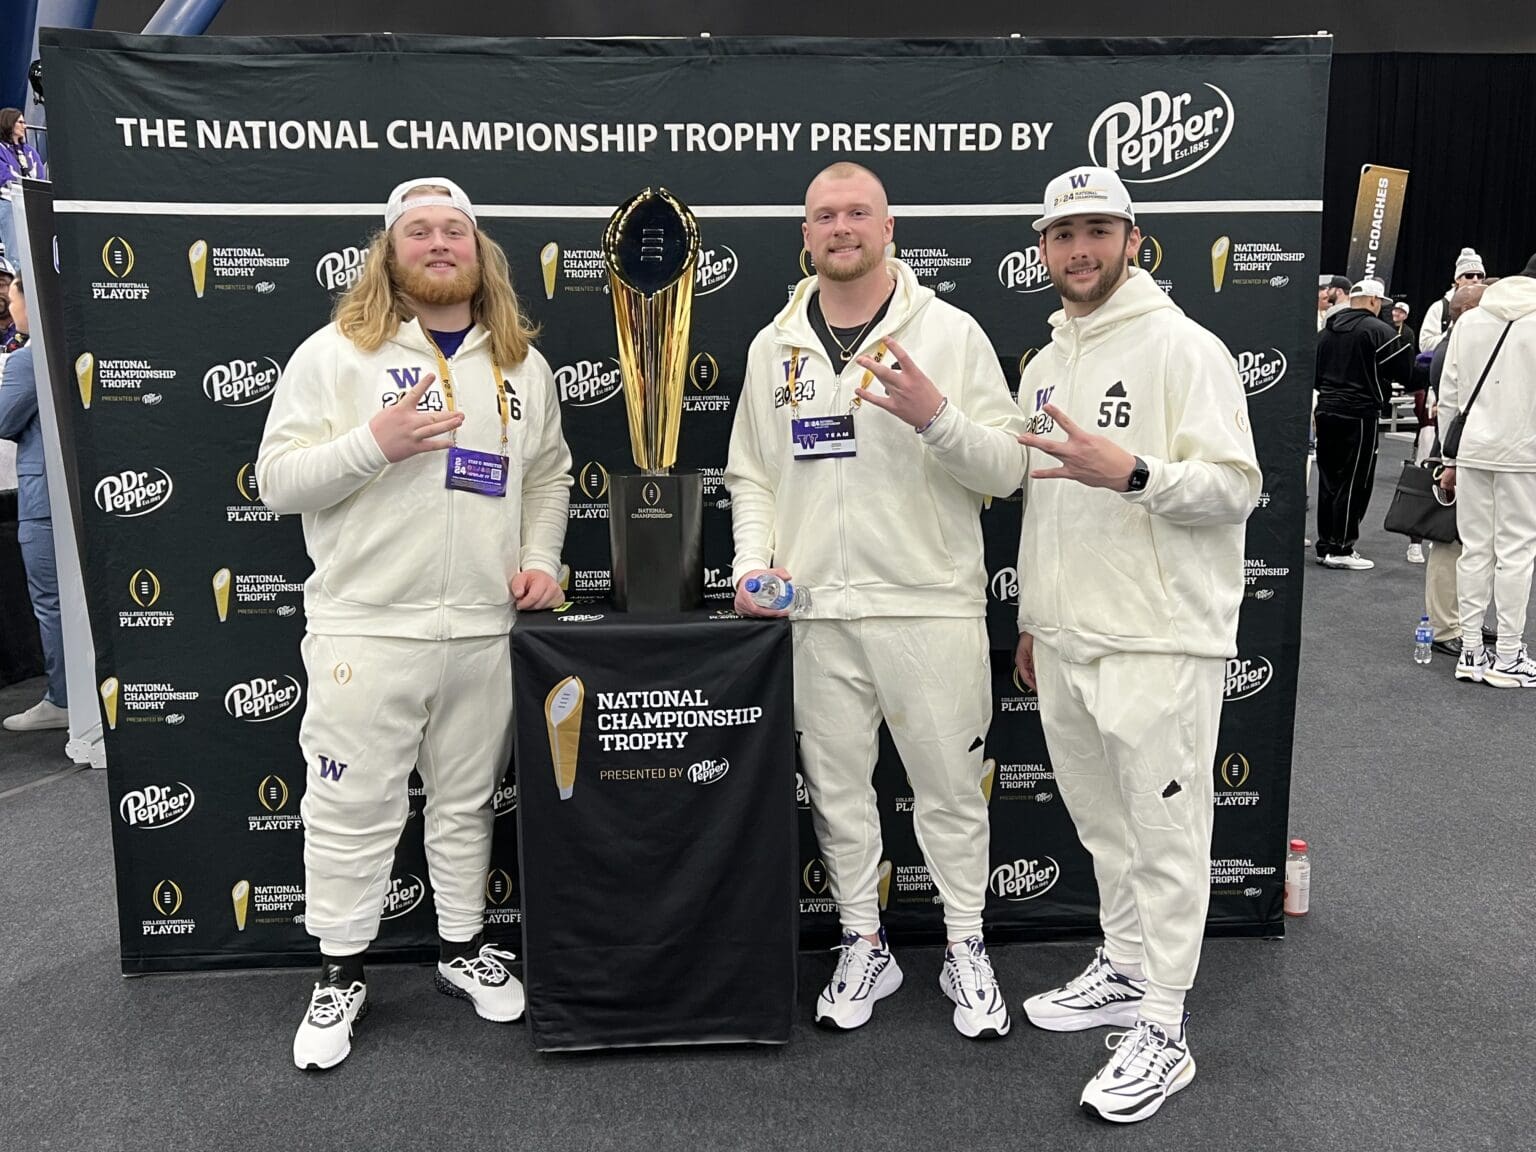 From left, Landen Hatchett, Geirean Hatchett and Jake Mason pose with the CFP National Championship trophy, all wearing white from head to toe.